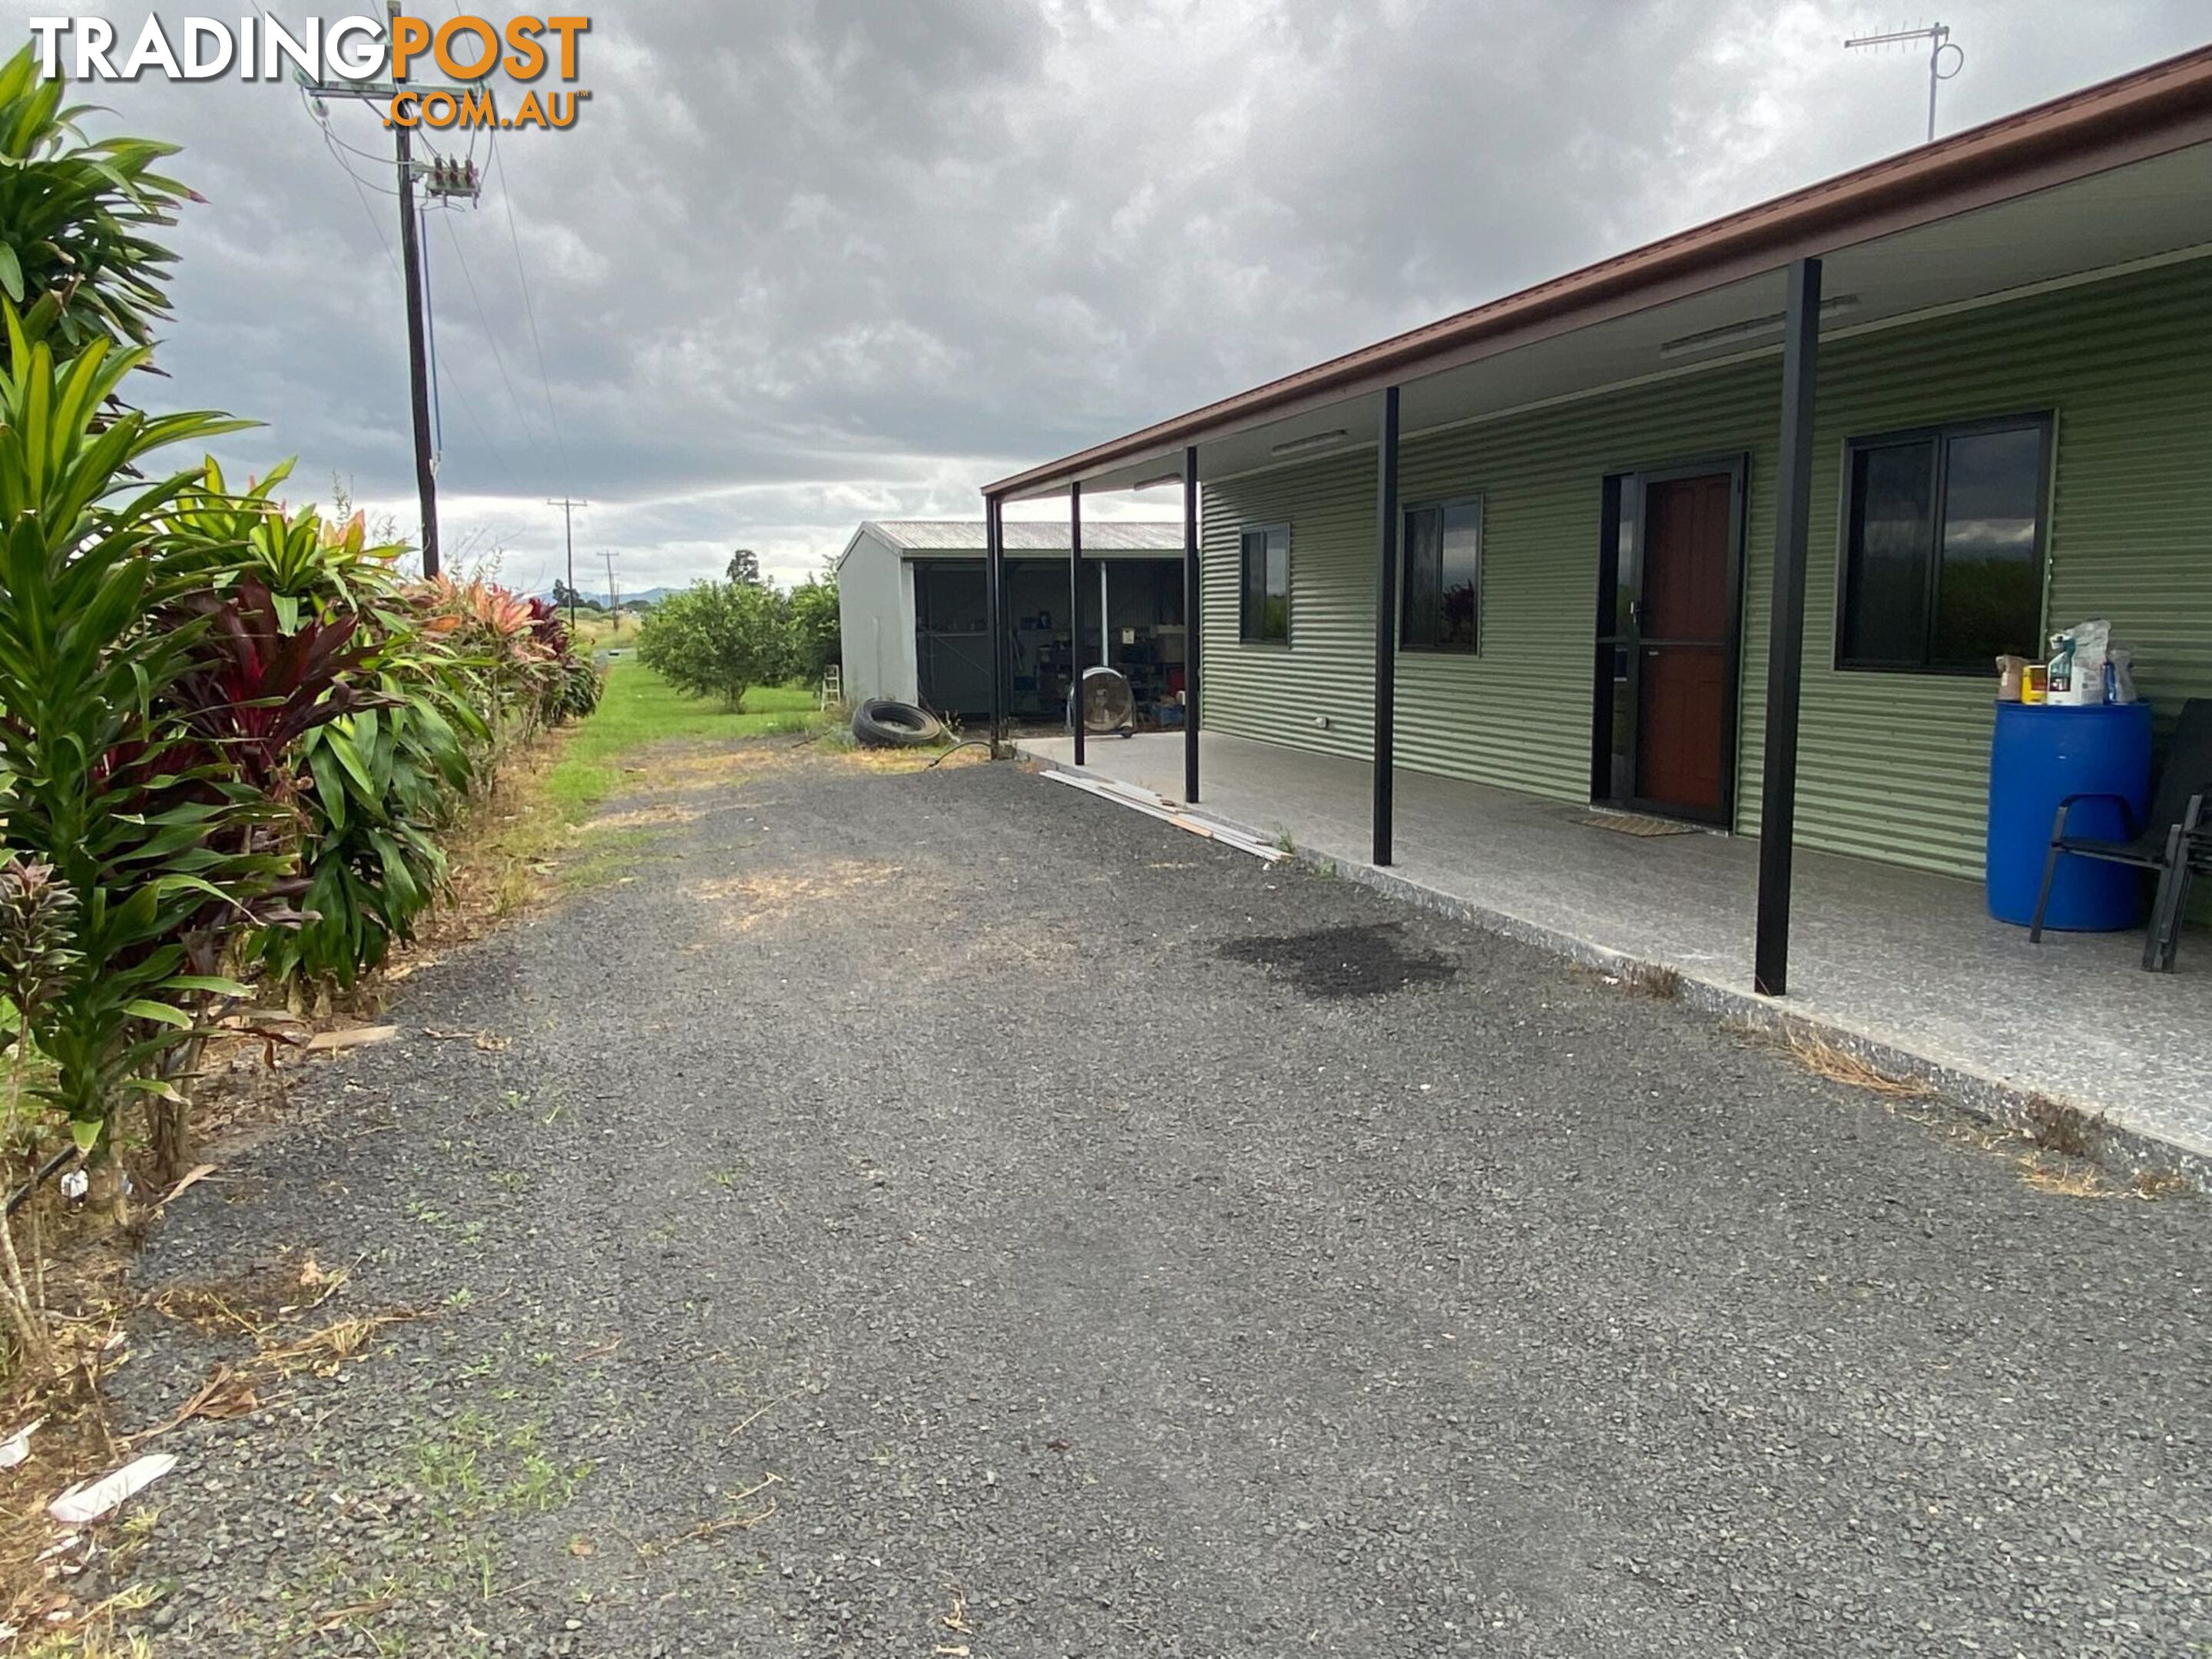 50 Moresby Road Moresby QLD 4871